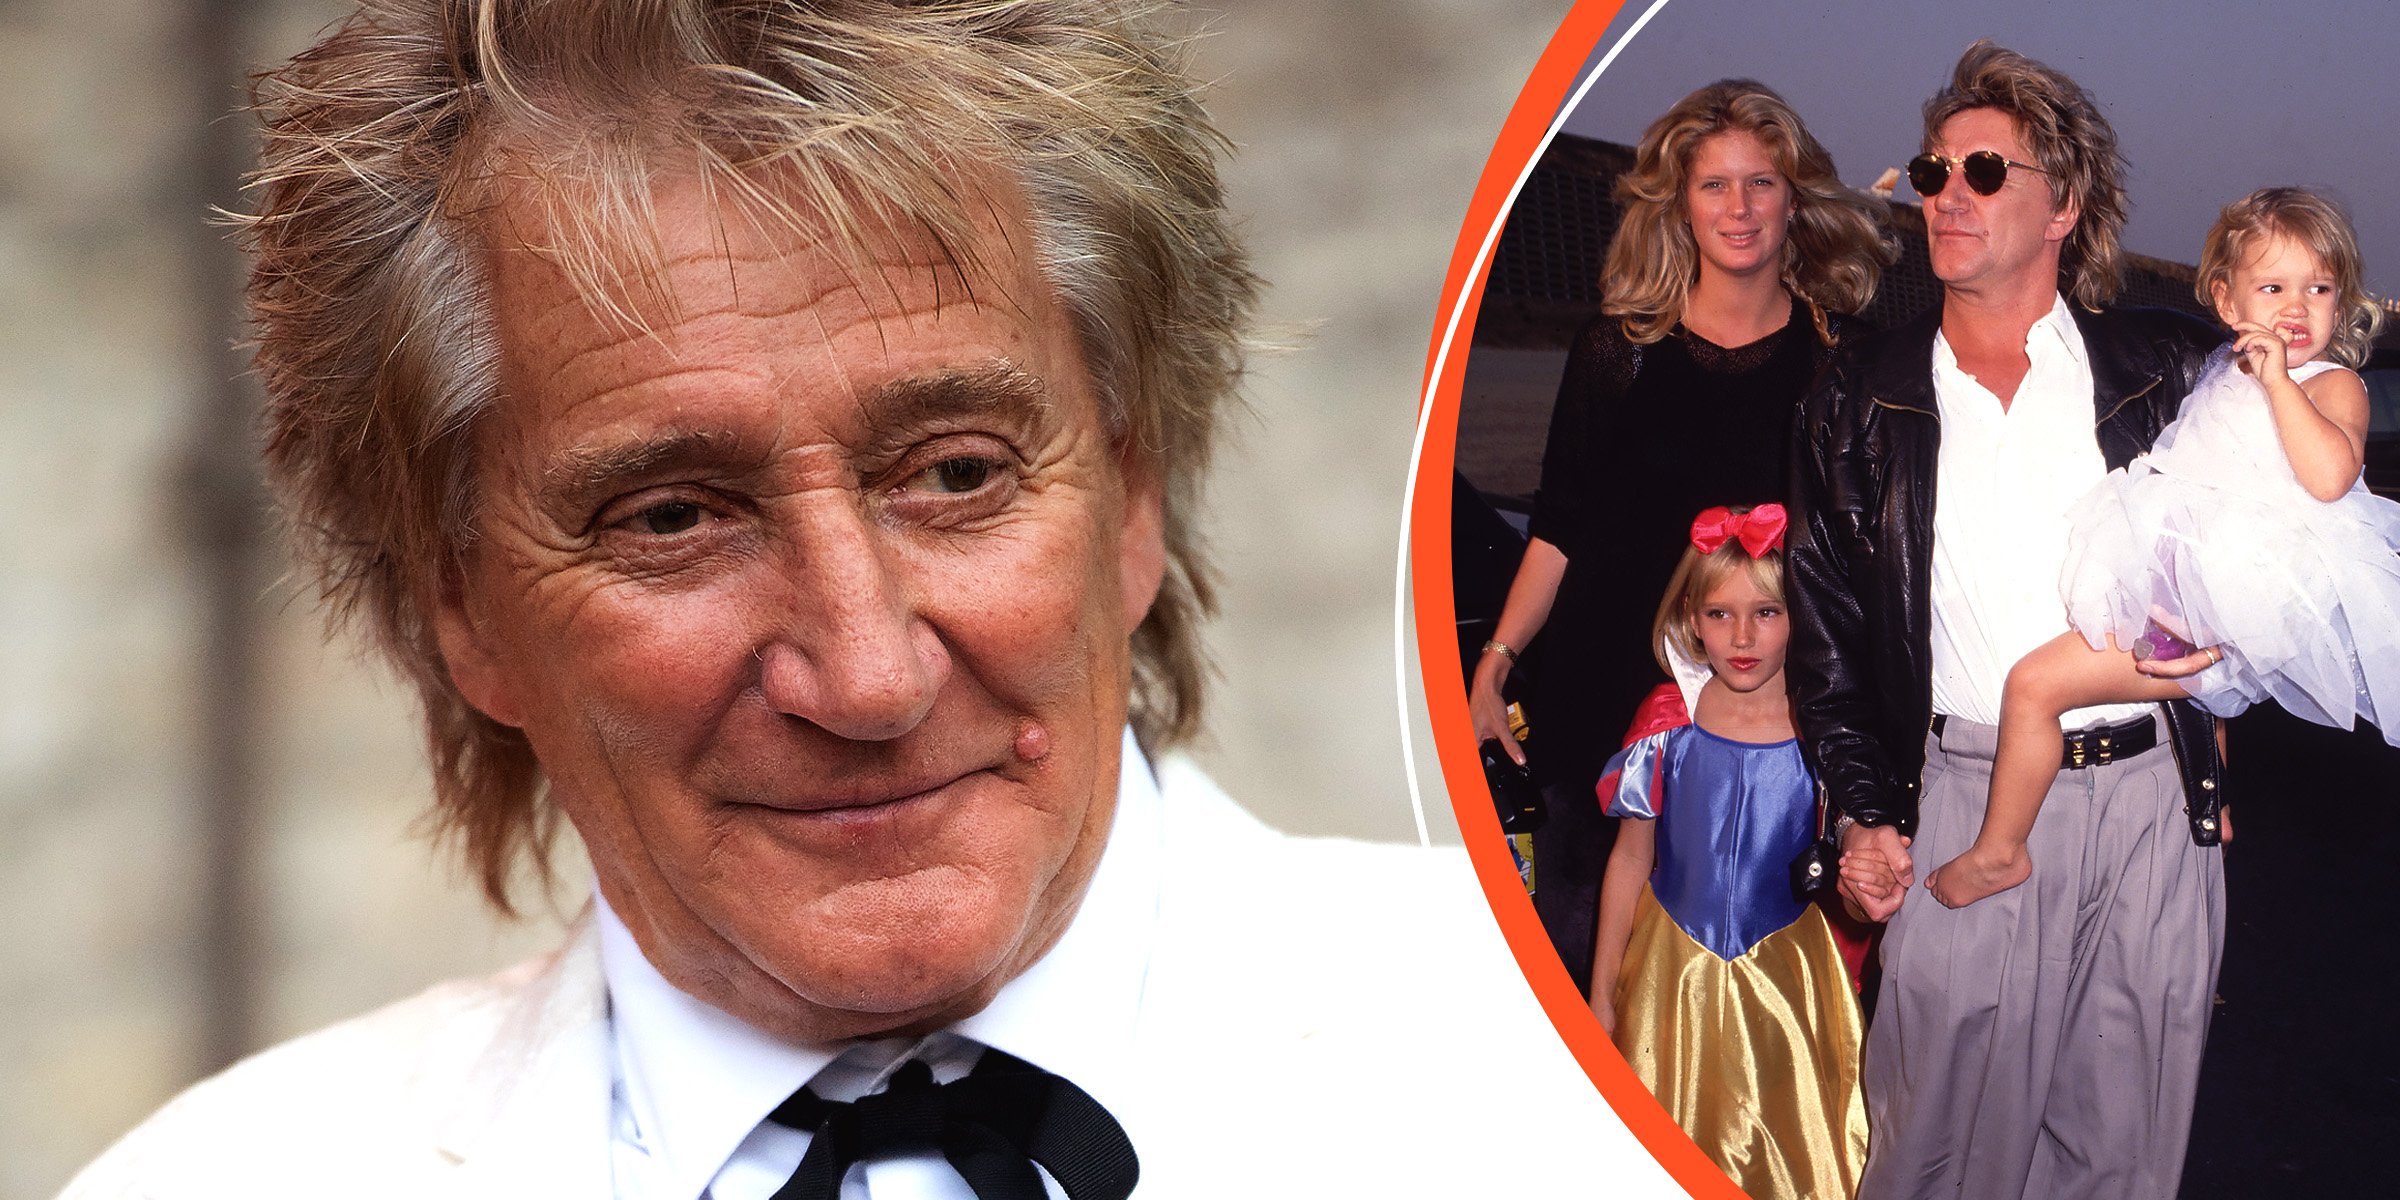  Rod Stewart | Rod Stewart with his wife Penny Lancaster and their children | Source: Getty Images 